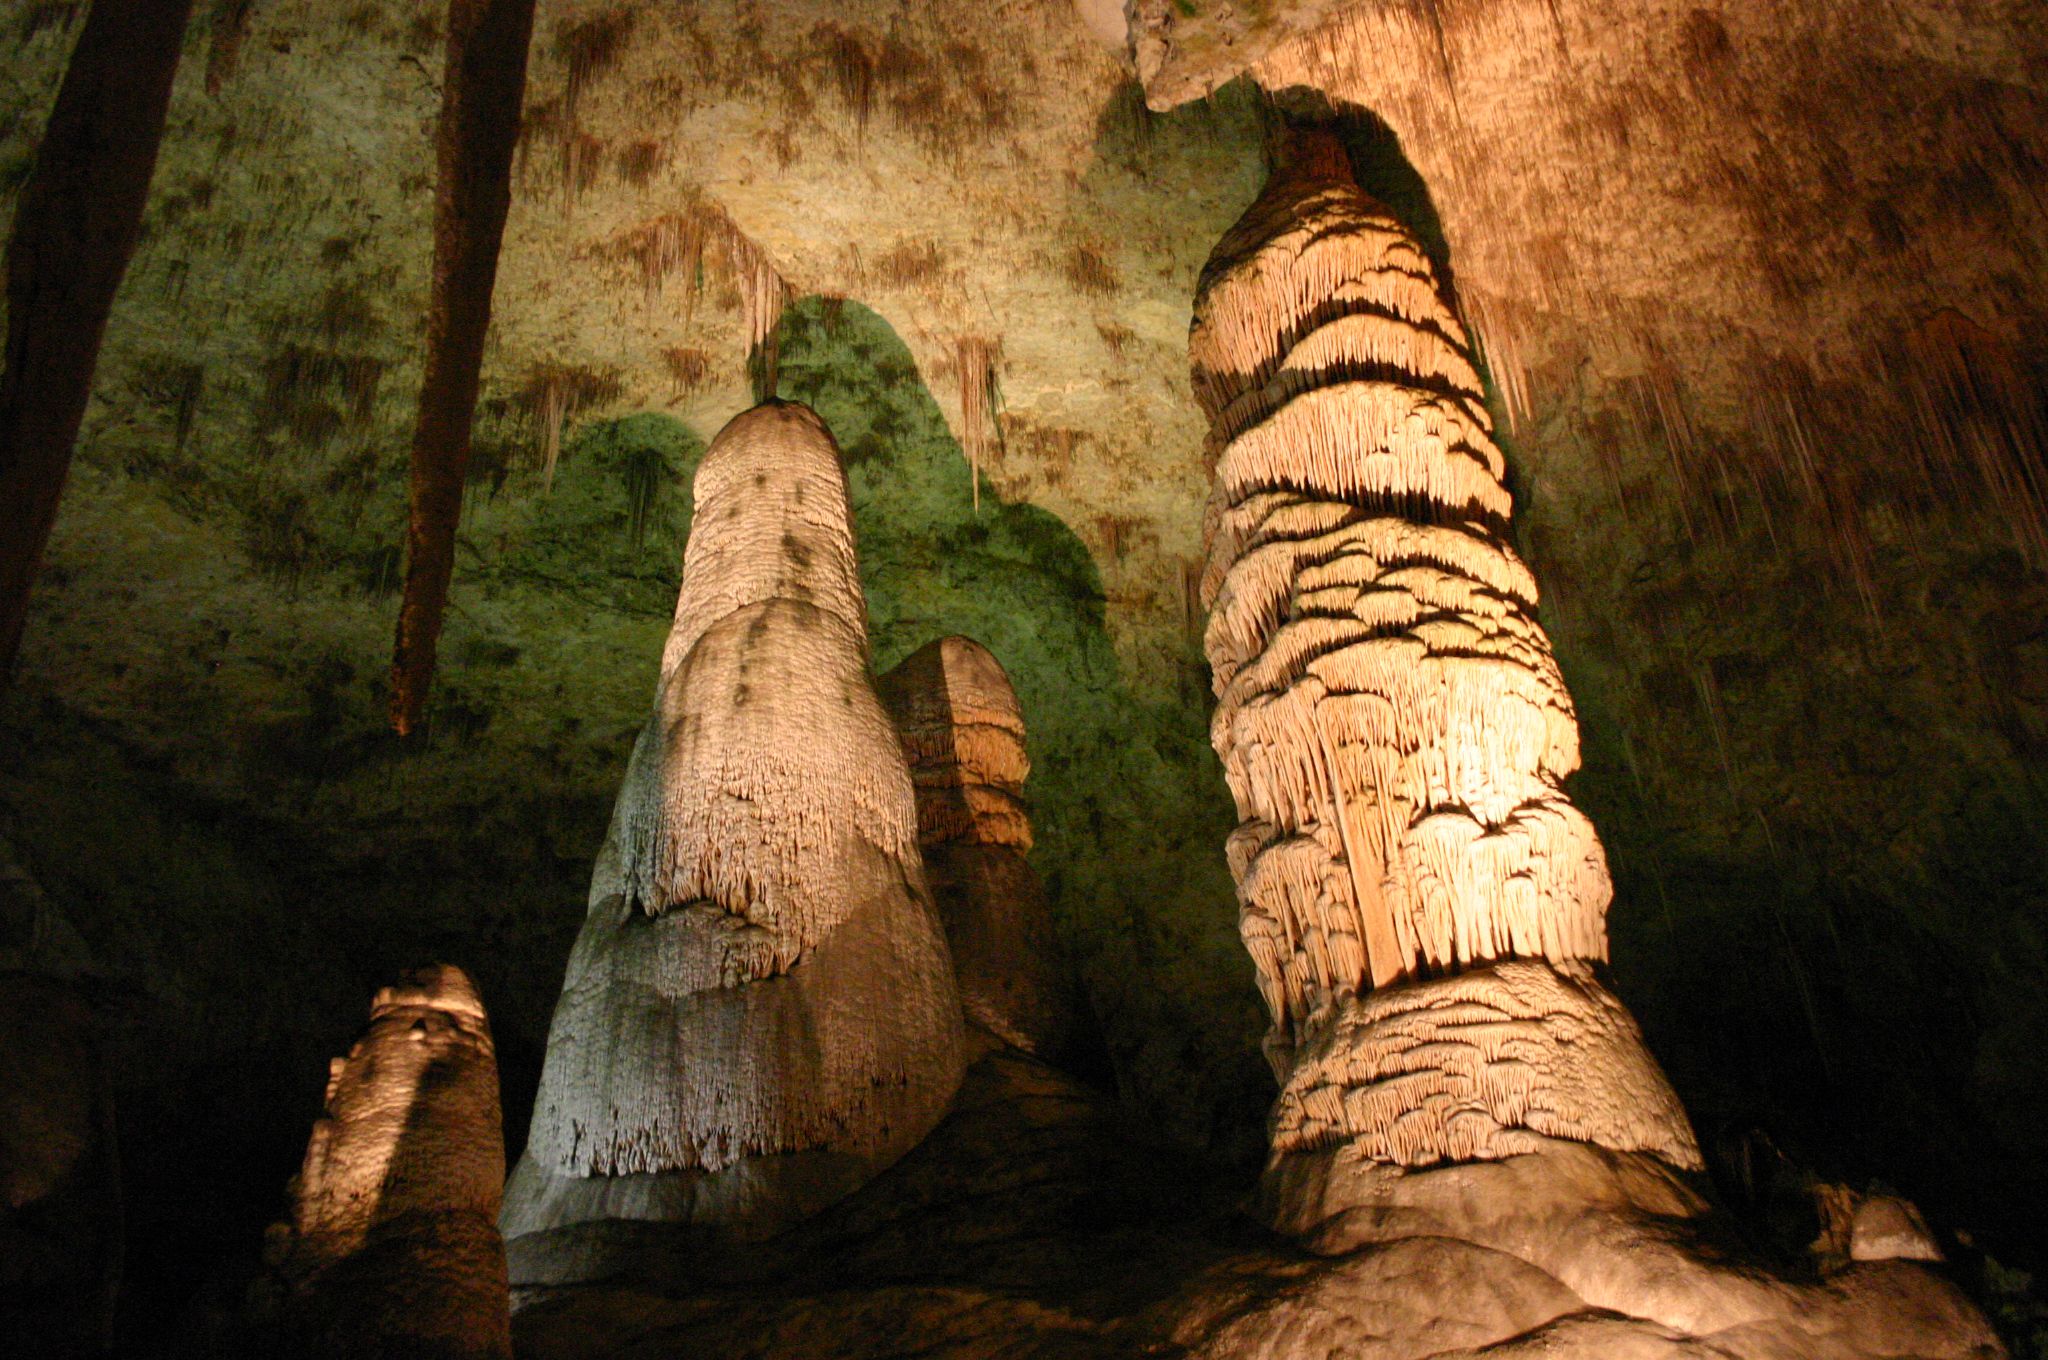 <p><b>Carlsbad, New Mexico</b></p><p>As far as underground caverns go, the <a href="https://www.nps.gov/cave/index.htm">Carlsbad Caverns</a> are a must-see — and visitors only have to pay $15 to tour them. Located in Chihuahuan Desert of southern New Mexico, the caverns are in the Carlsbad Caverns National Park, which is home to more than 100 limestone caves that are known as some of the most incredible, beautiful environments in the country.</p>